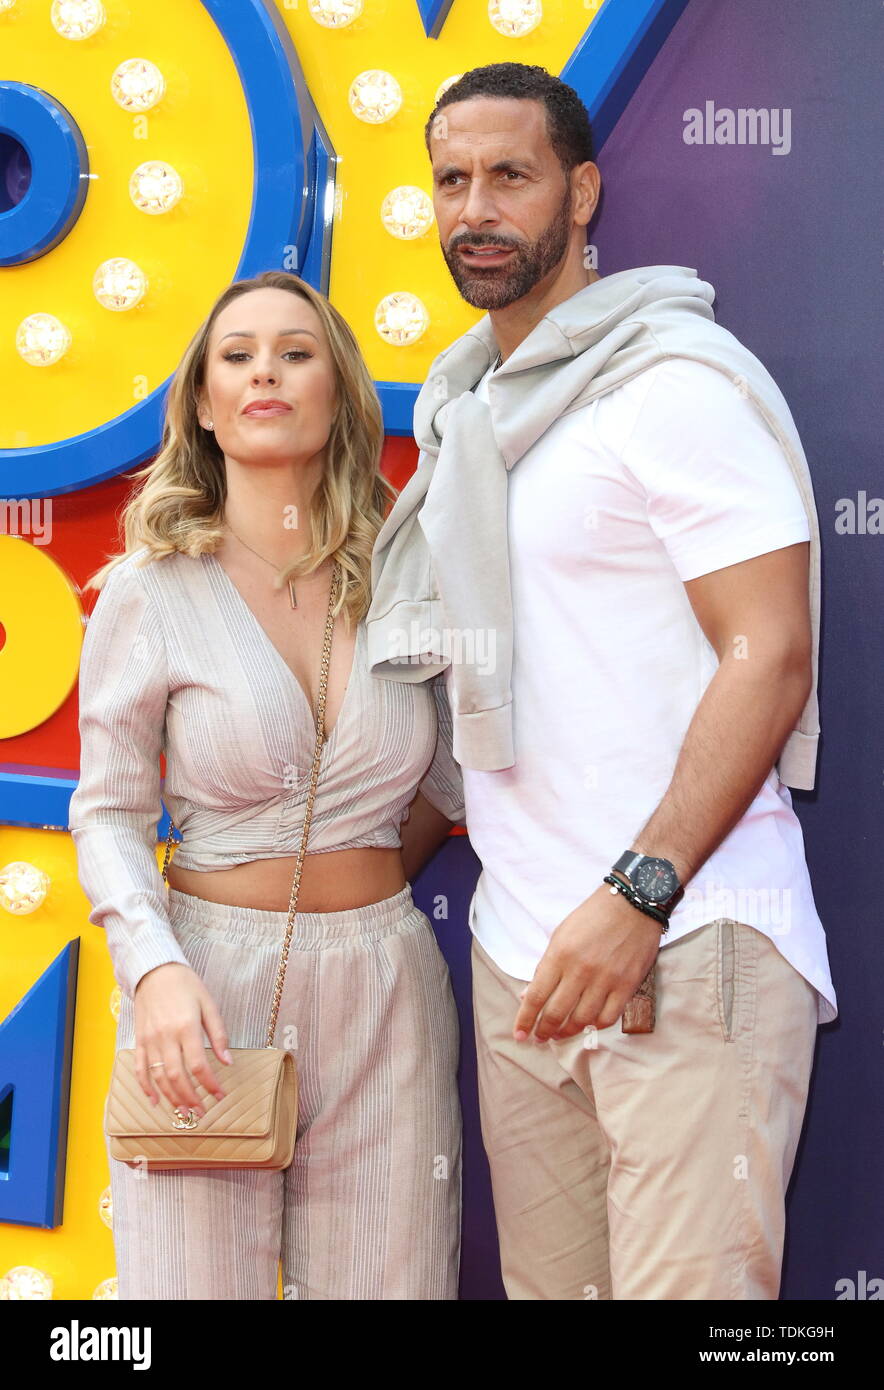 London, UK. 16th June, 2019. Rio Ferdinand and Kate Wright attend the European Premiere of Toy Story 4 at Odeon Luxe, Leicester Square in London. Credit: SOPA Images Limited/Alamy Live News Stock Photo